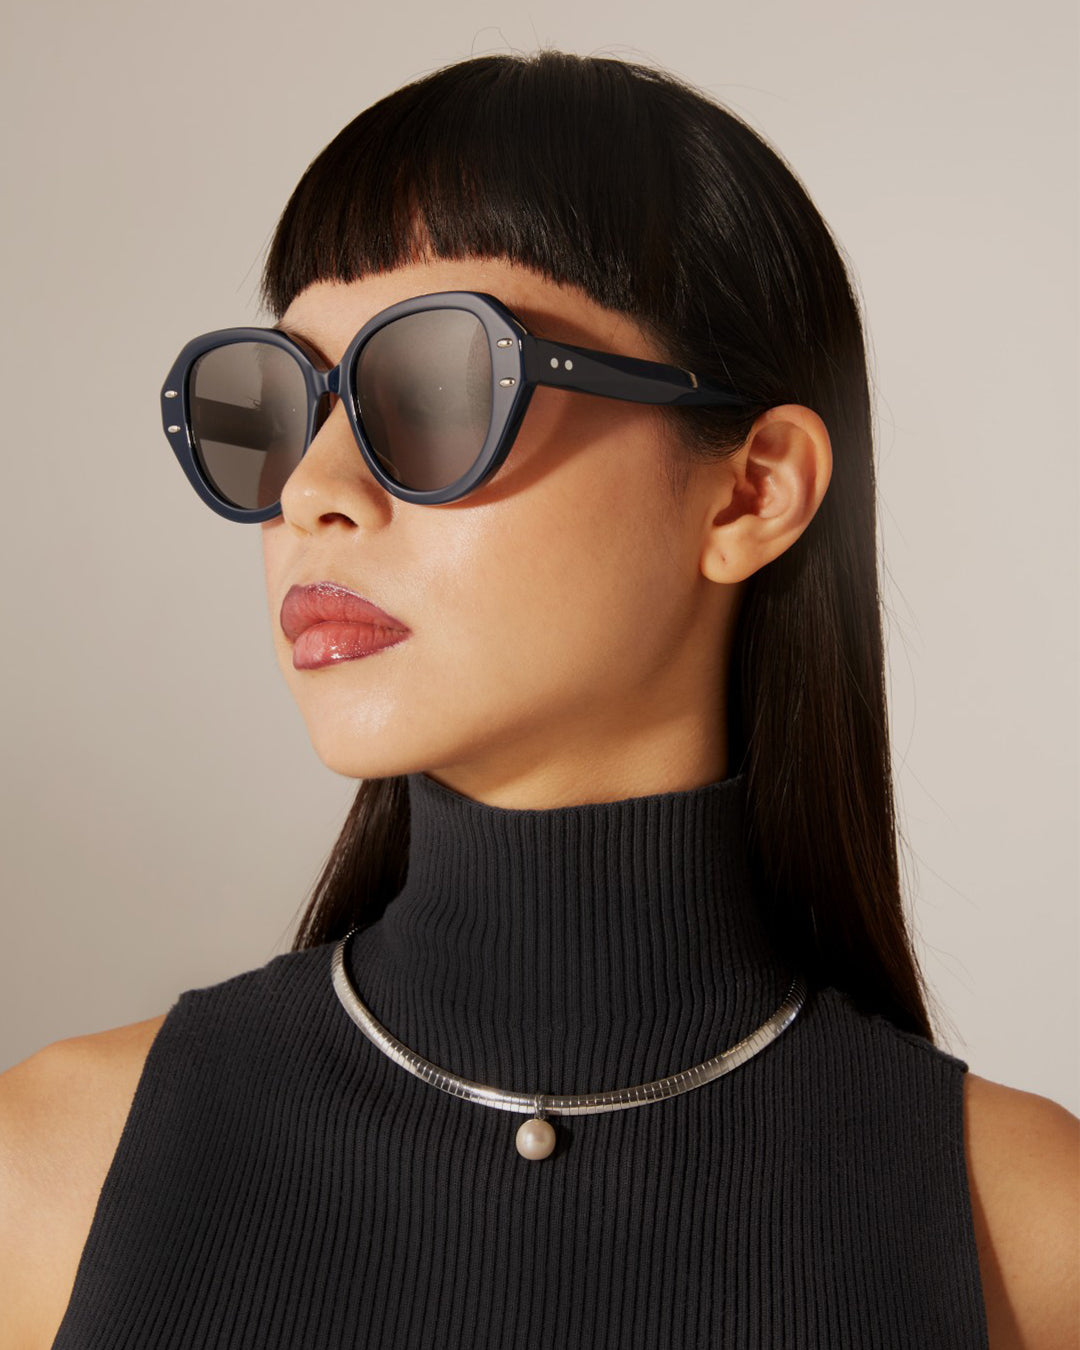 A person with long dark hair and straight bangs wears stylish Mirage sunglasses by For Art's Sake®, a black sleeveless turtleneck top, and a gold and silver-tone metal necklace with a single pearl pendant. The background is plain and light-colored.